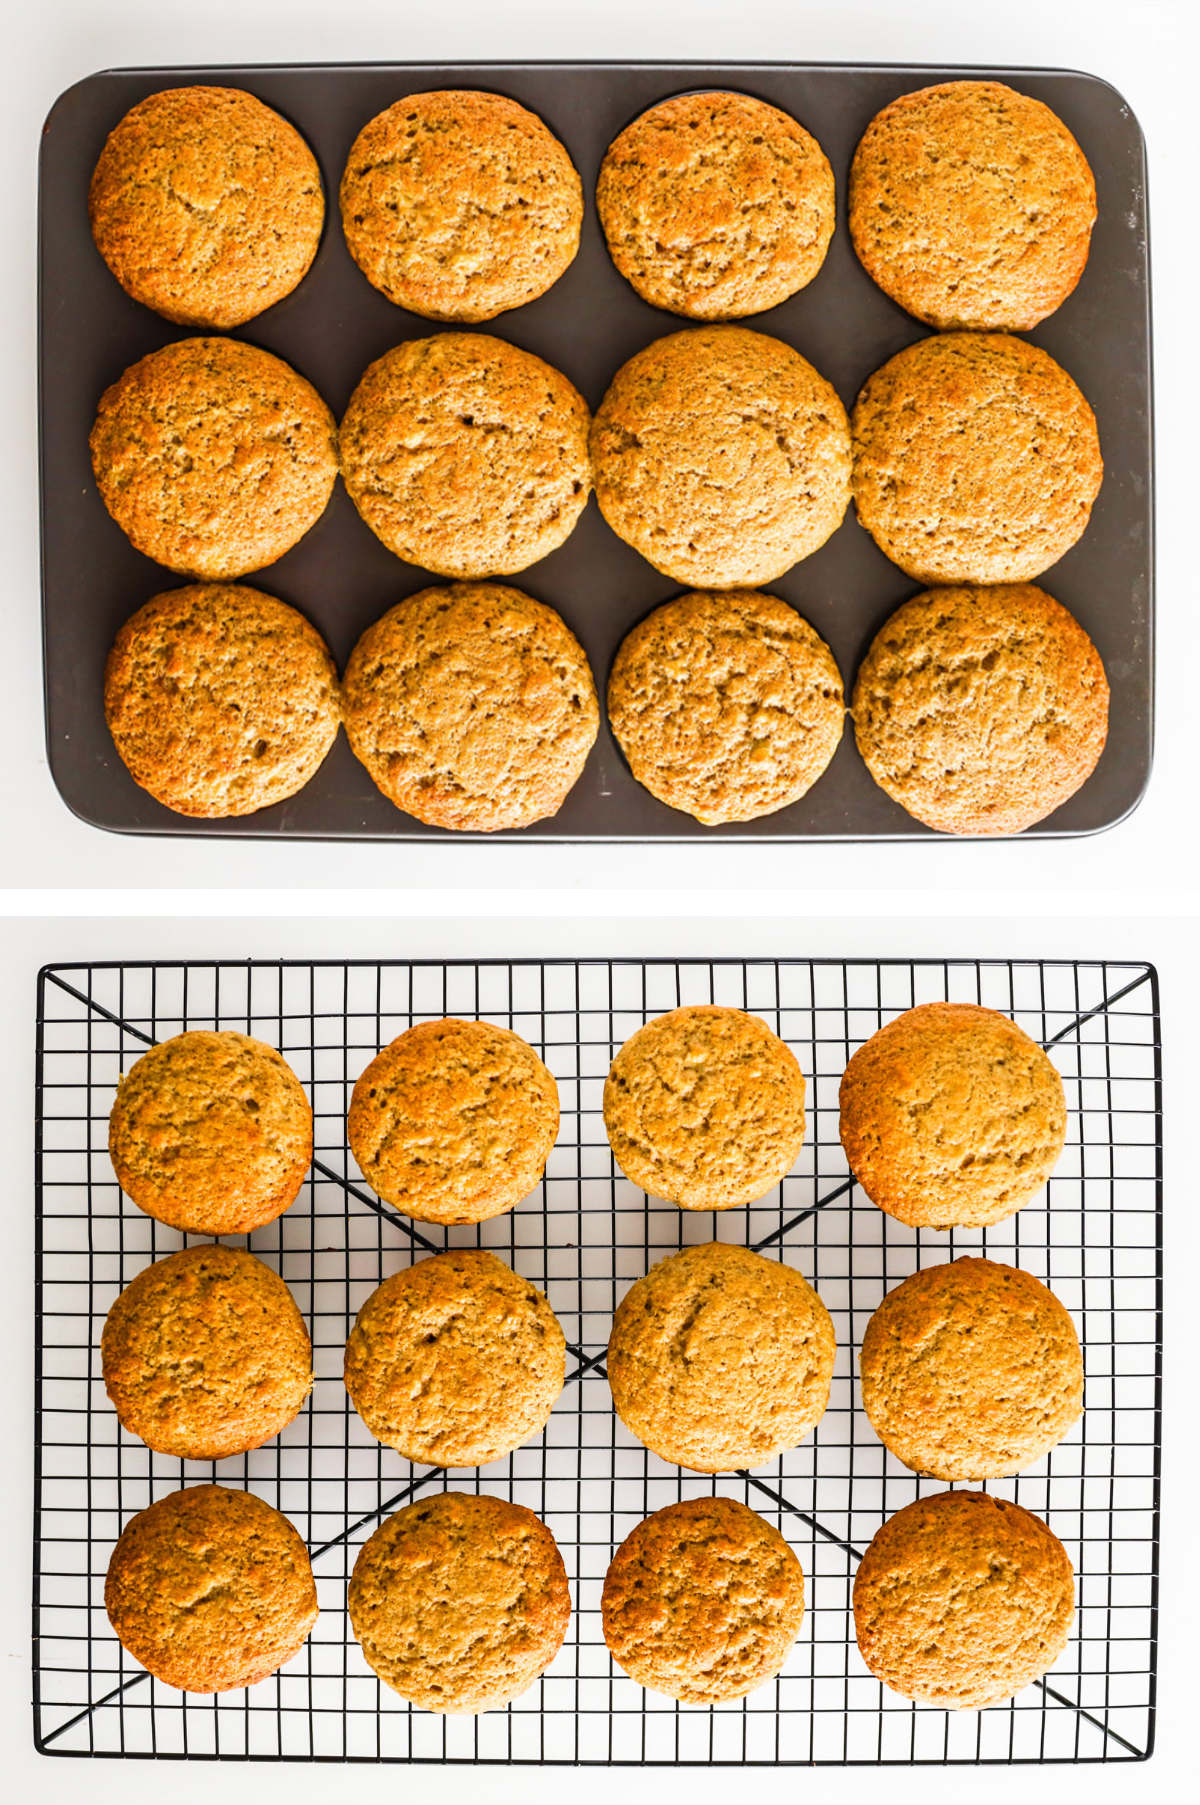 Two images in one: 1. Overhead view of baked muffins in tray. 2. Overhead view of baked muffins cooling on a rack. 